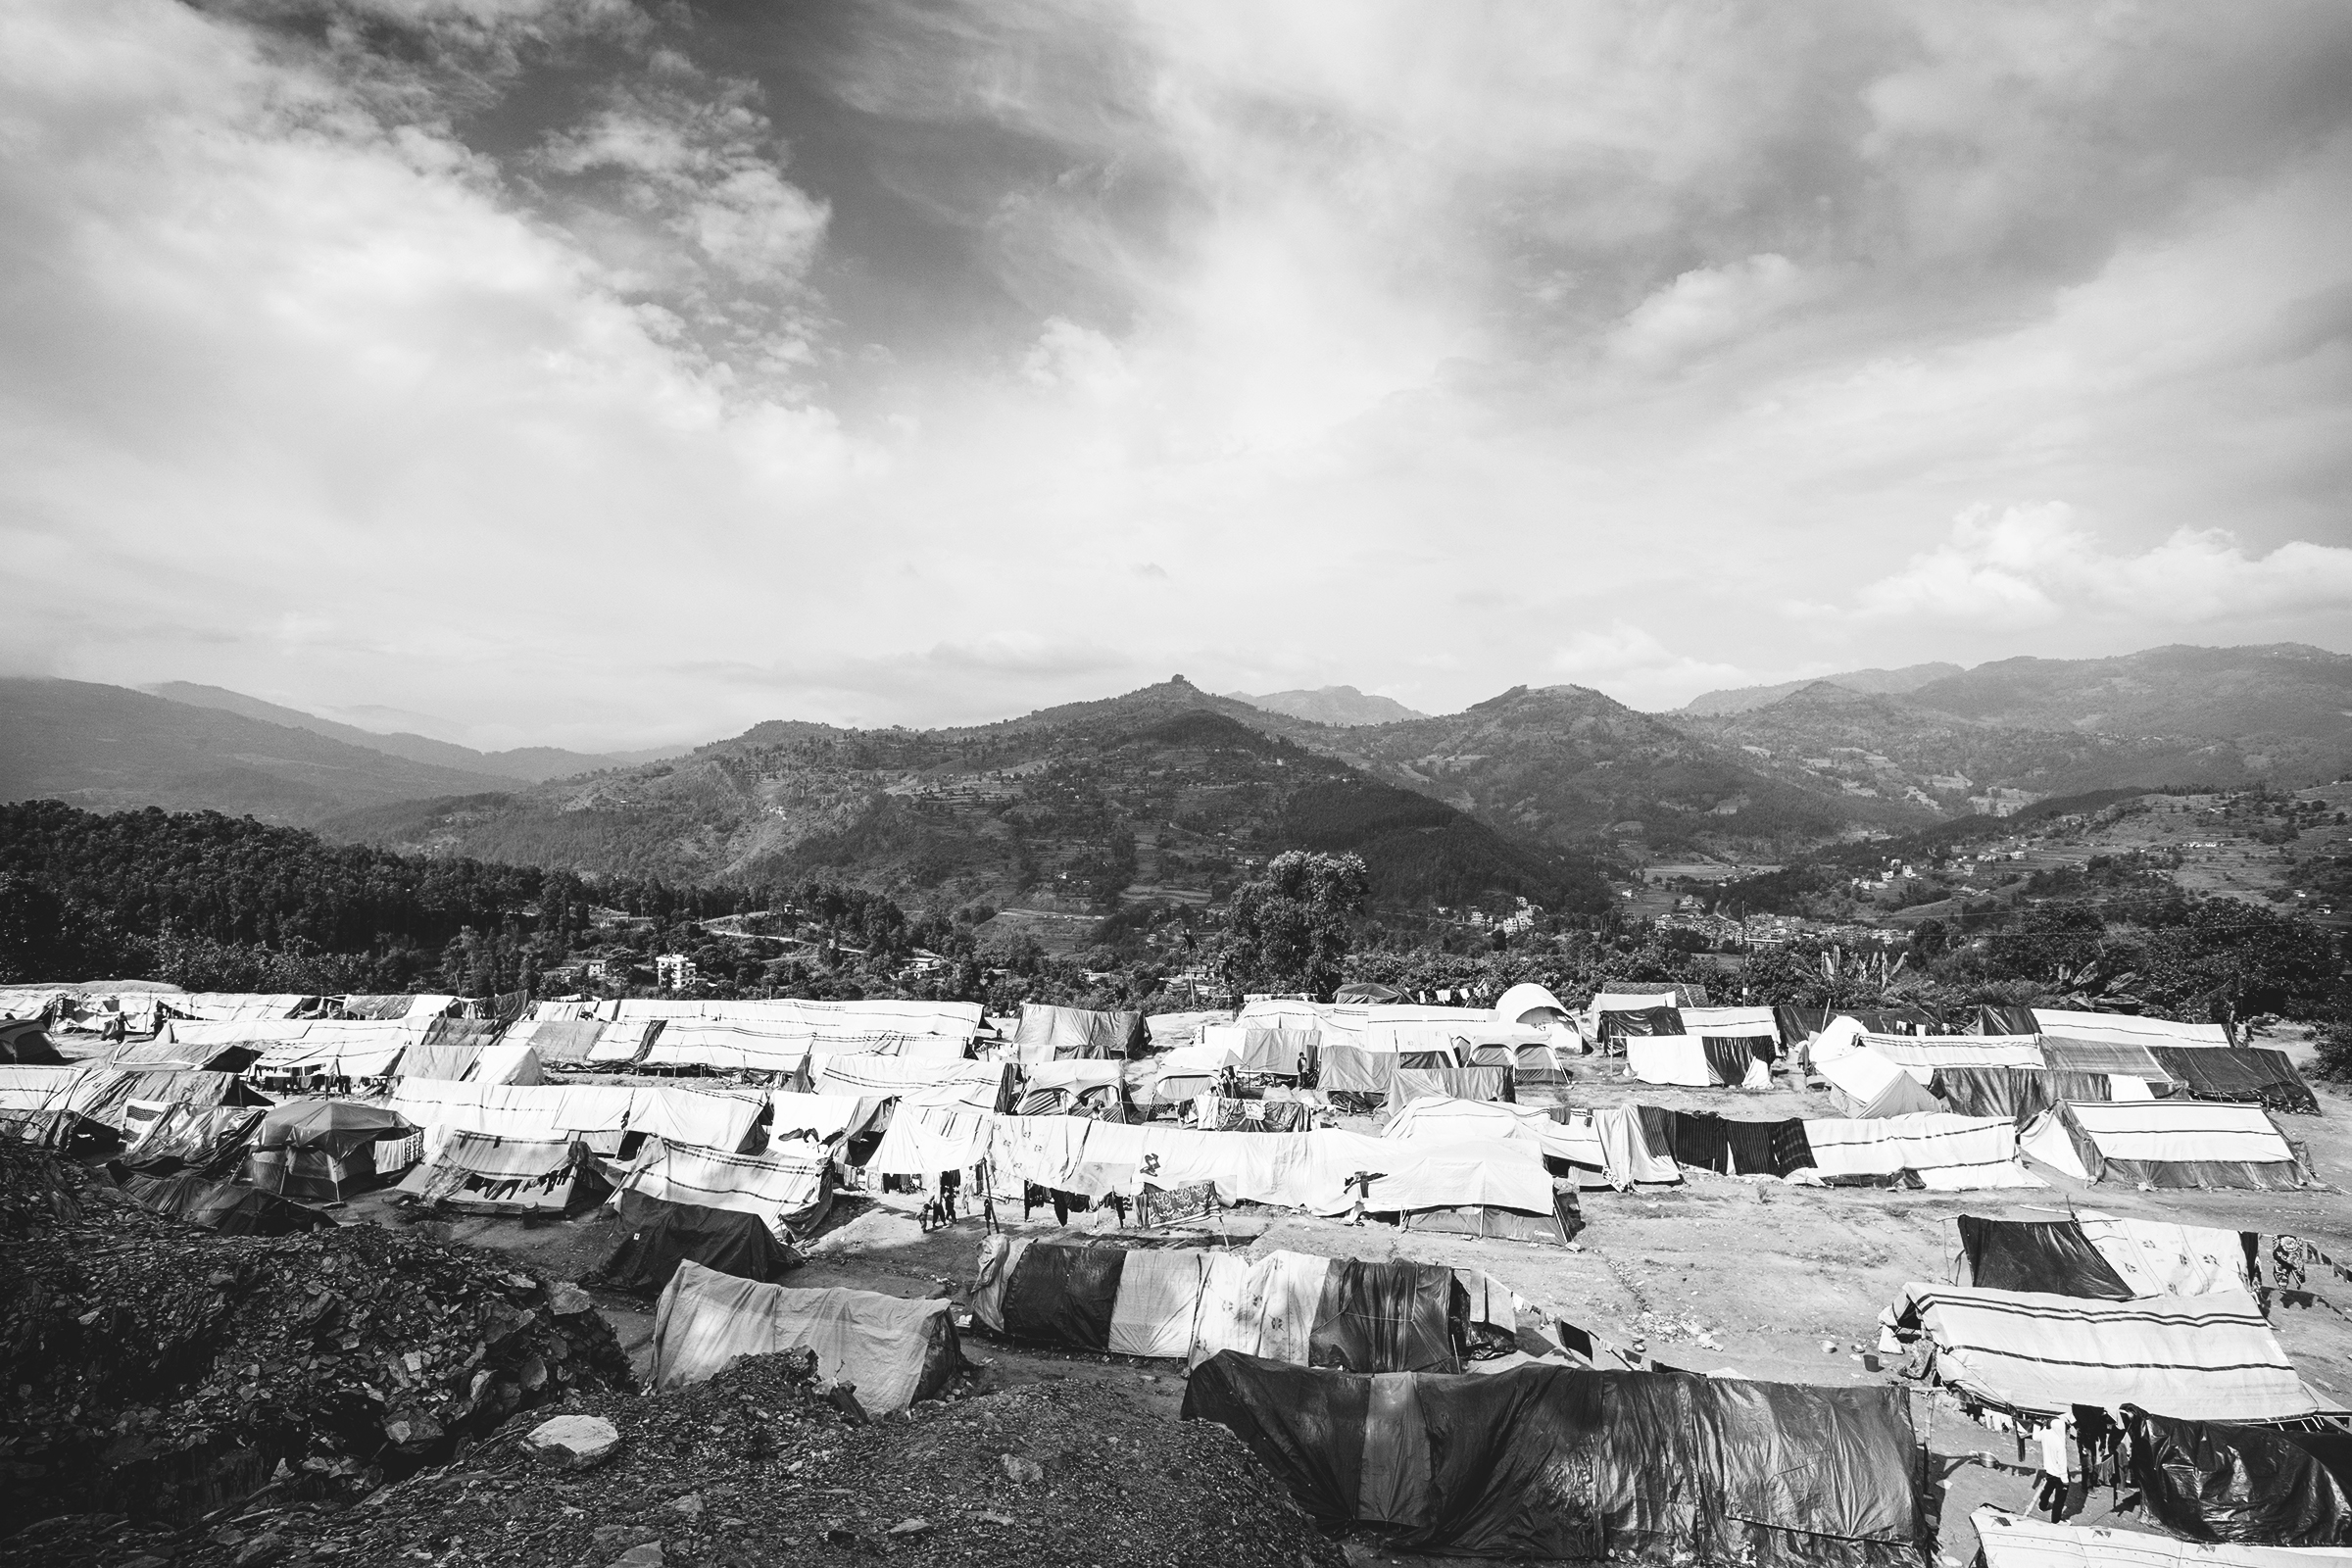  An estimated 2.8 million people were displaced following the 7.8 magnitude April 2015 earthquake in Nepal. With over 500,000 homes destroyed, affected families have been living temporarily in displacement camps since.&nbsp;  Alchi Danda camp in Nepa